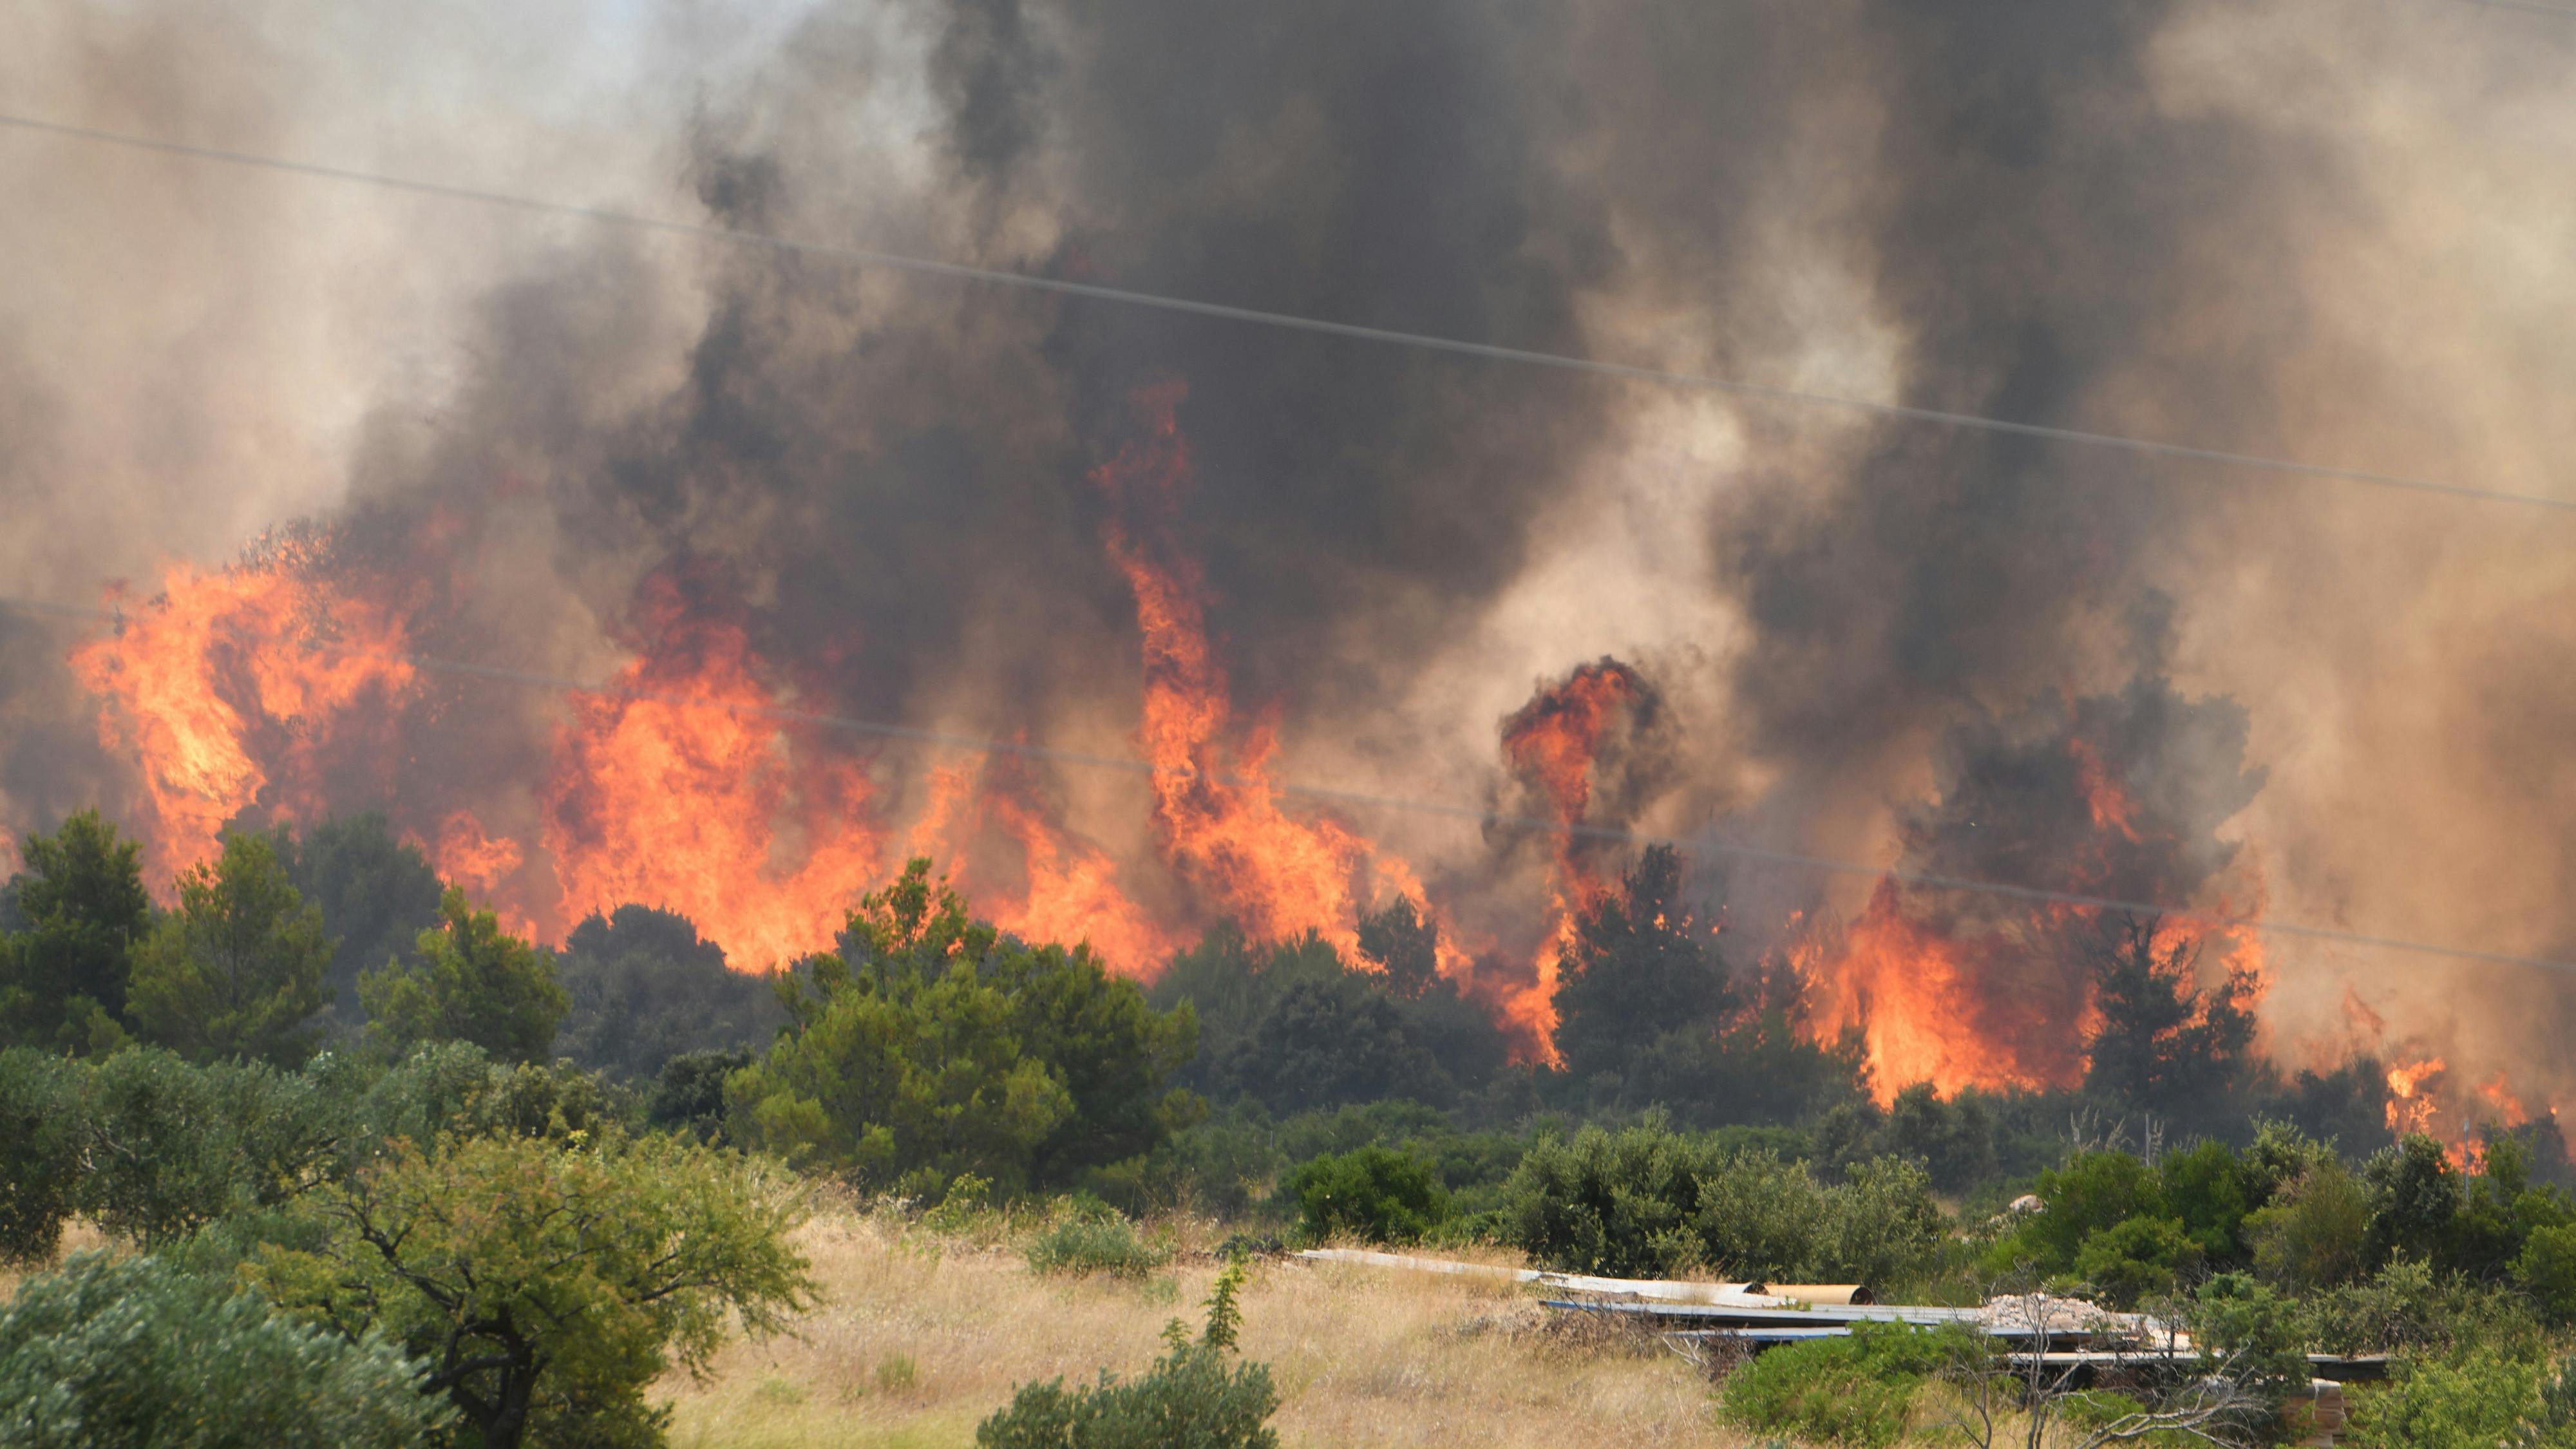 A major fire broke out in Grebastica village in Sibenik, Croatia on July 13, 2023. 79 firefighters with 28 fire trucks, Sibenik Intervention Fire Brigade, three Canadair CL-415 firefighting aircraft, two Air Tractor firefighting aircraft are participating in the extinguishing. Photo: Hrvoje Jelavic/PIXSELL